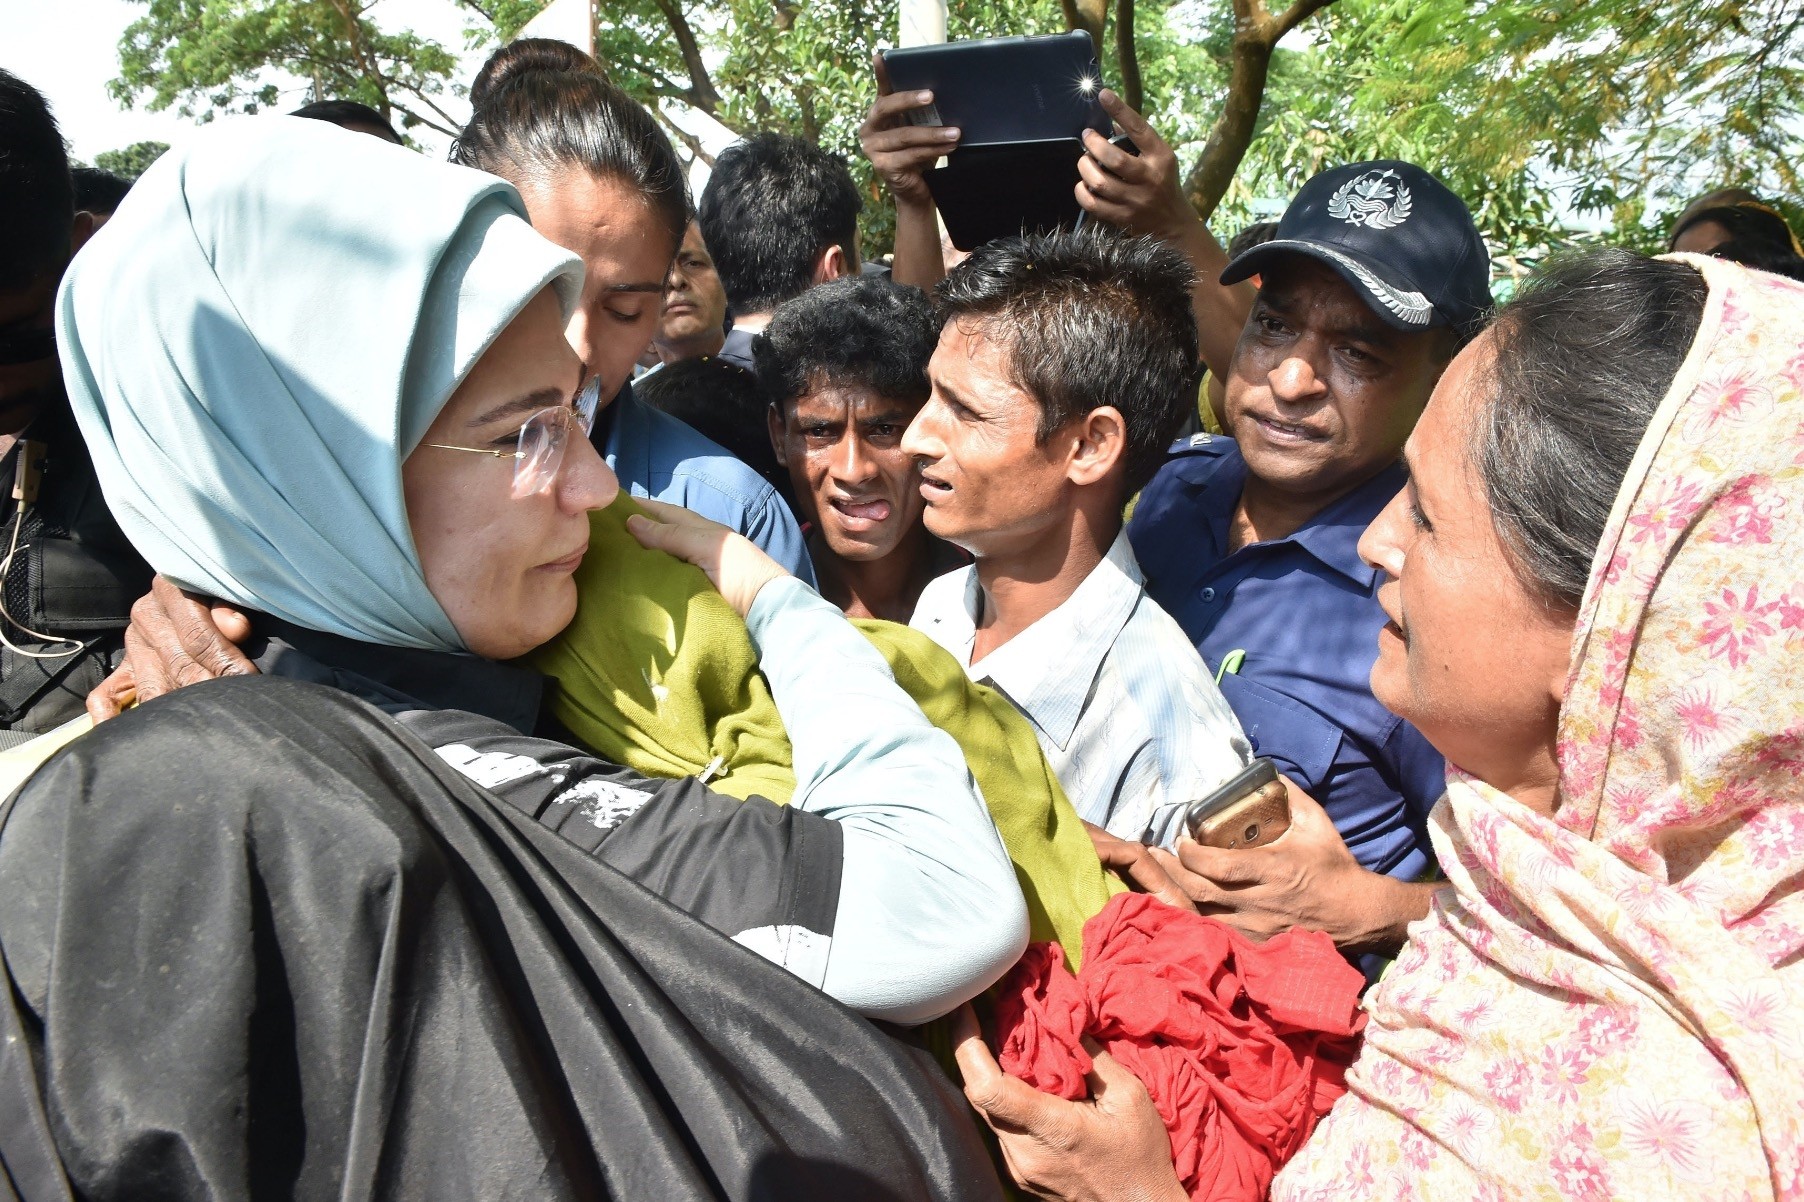 First lady Emine Erdou011fan (L) hugs a Rohingya refugee who fled from the Myanmar government's brutality at a makeshift camp near Coxu2019s Bazar, Bangladesh, September 2017.